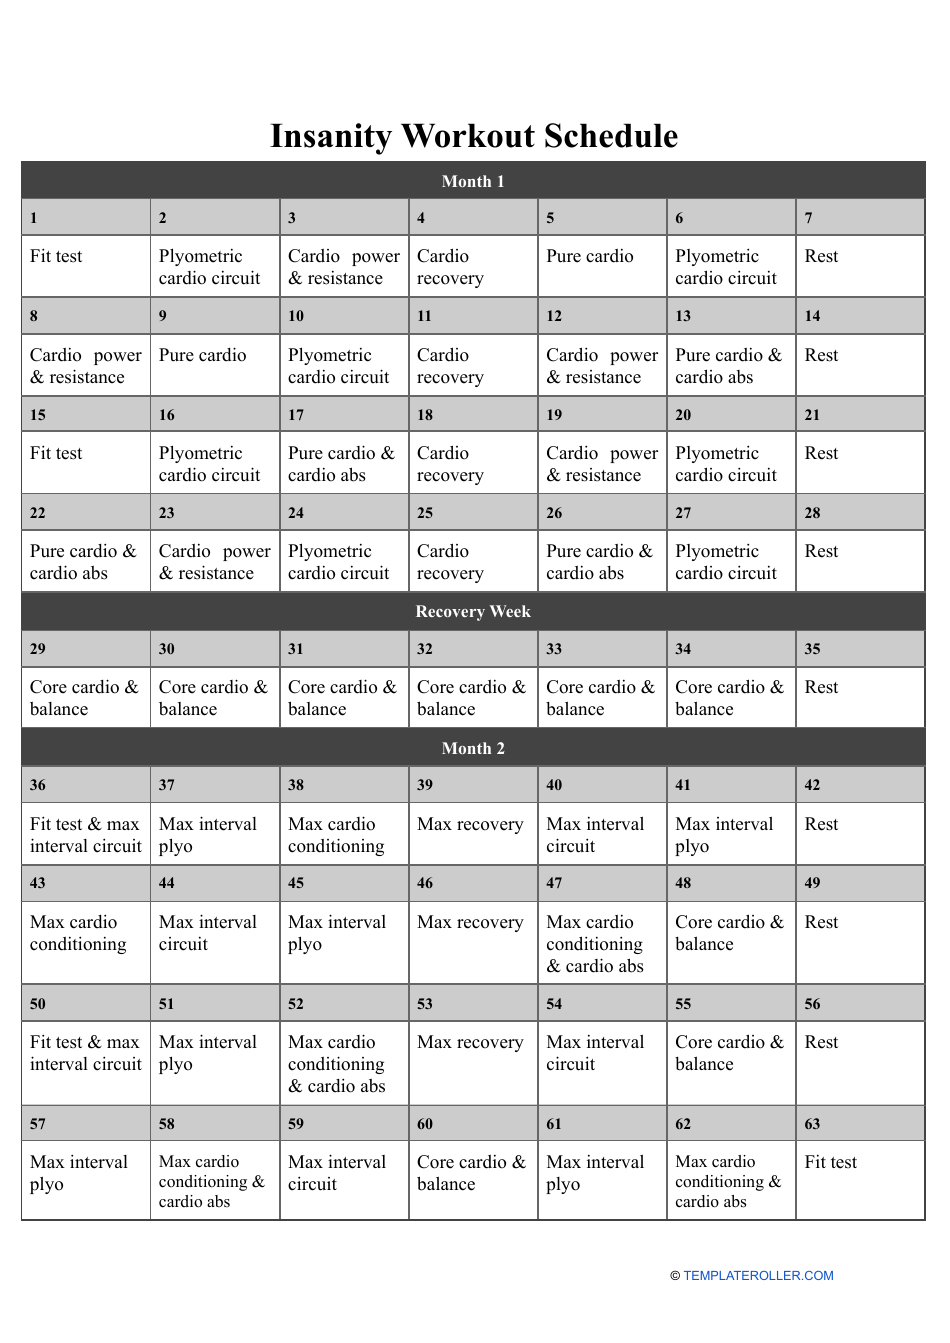 Insanity Workout Schedule - Printable Template